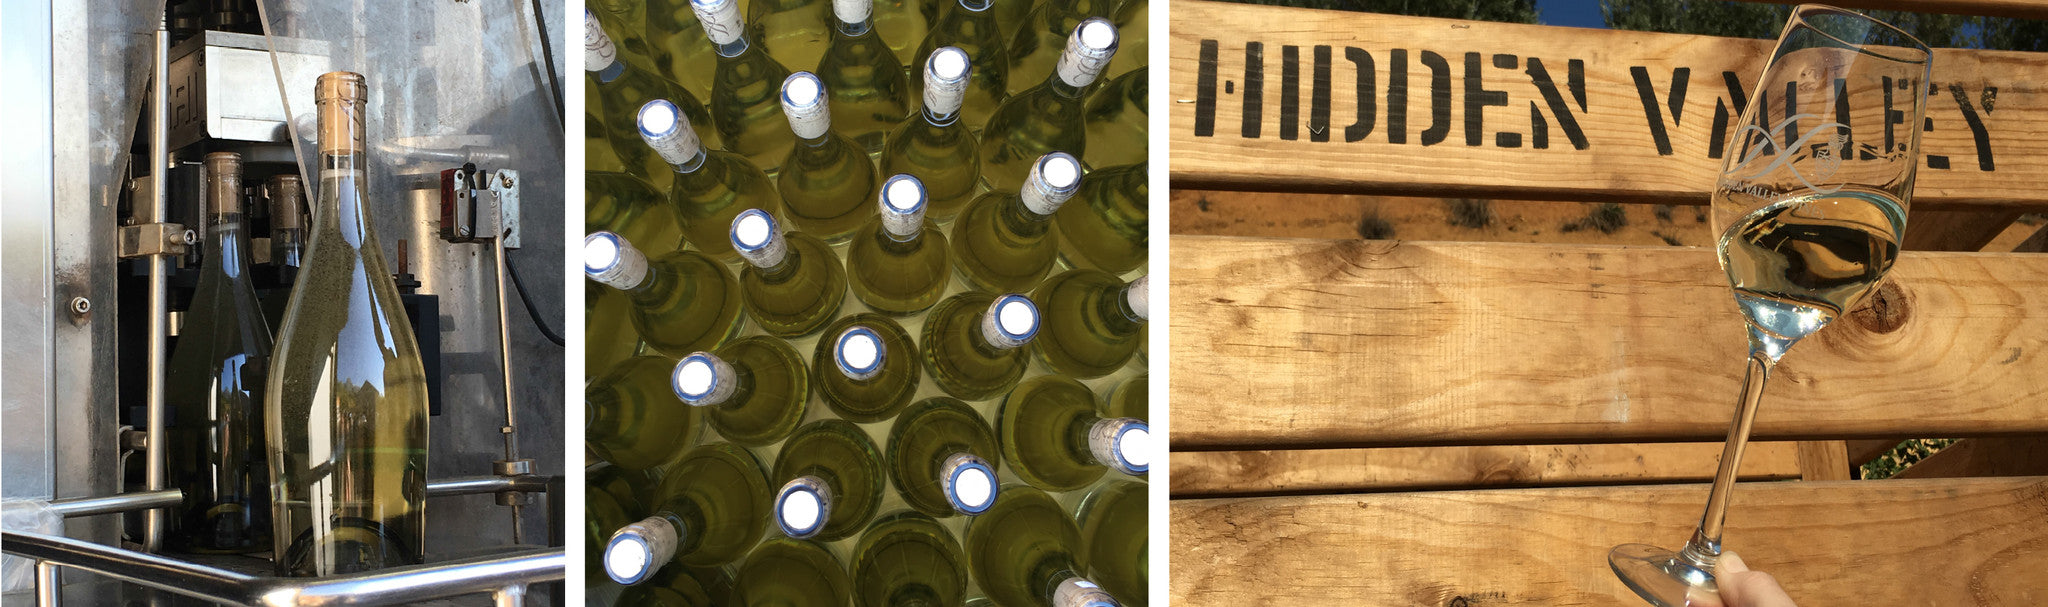 Sauvignon Blanc 2016 Bottling in Pictures